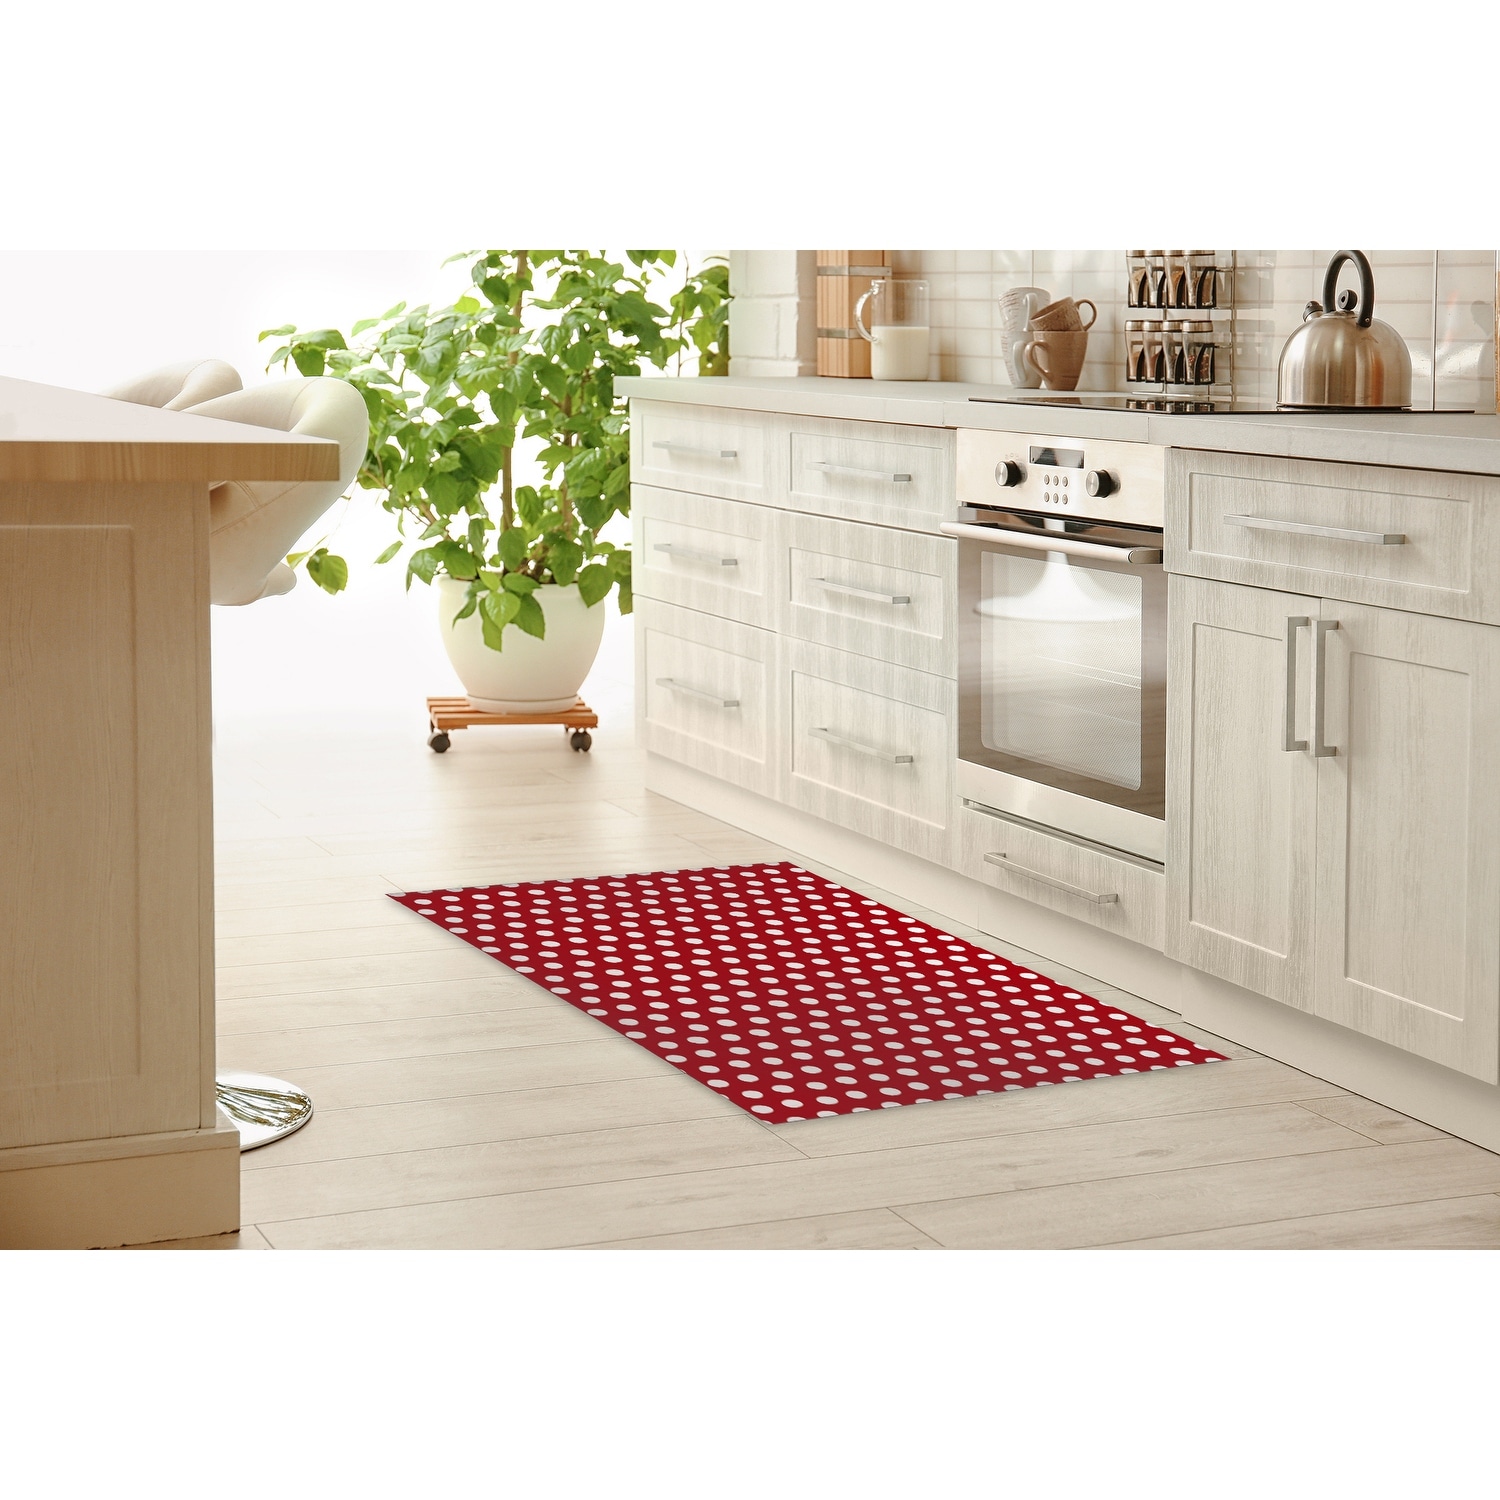 https://ak1.ostkcdn.com/images/products/is/images/direct/7e44ee6ad096ffea2f925698e4d00f927b70c776/BIG-POLKA-DOTS-RED-Kitchen-Mat-By-Becky-Bailey.jpg